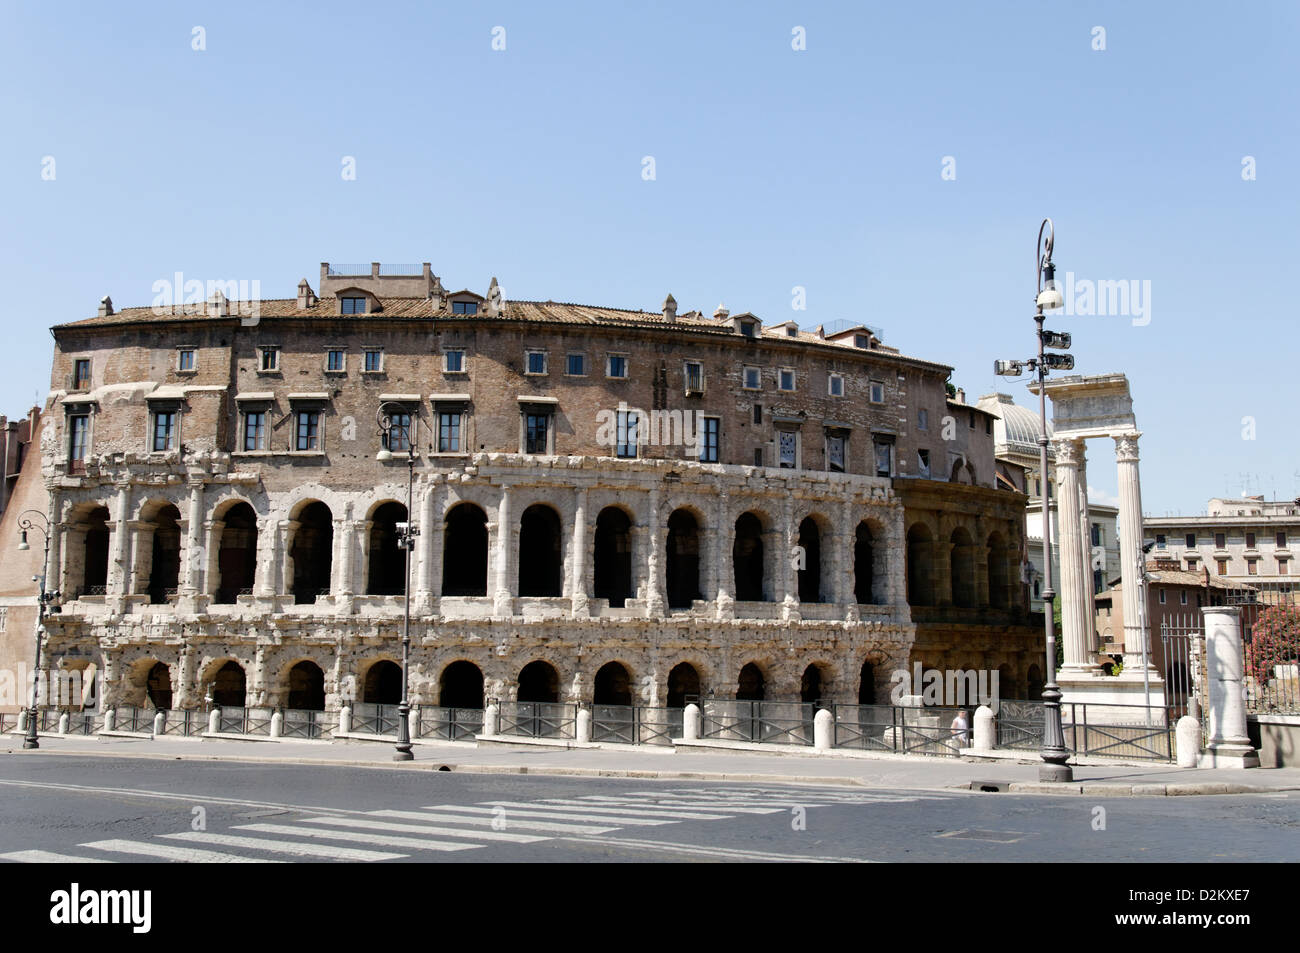 Rome Italy.The Teatro di Marcello (Theatre of Marcellus) and remaining columns and frieze of the Temple of the Greek god Apollo Stock Photo